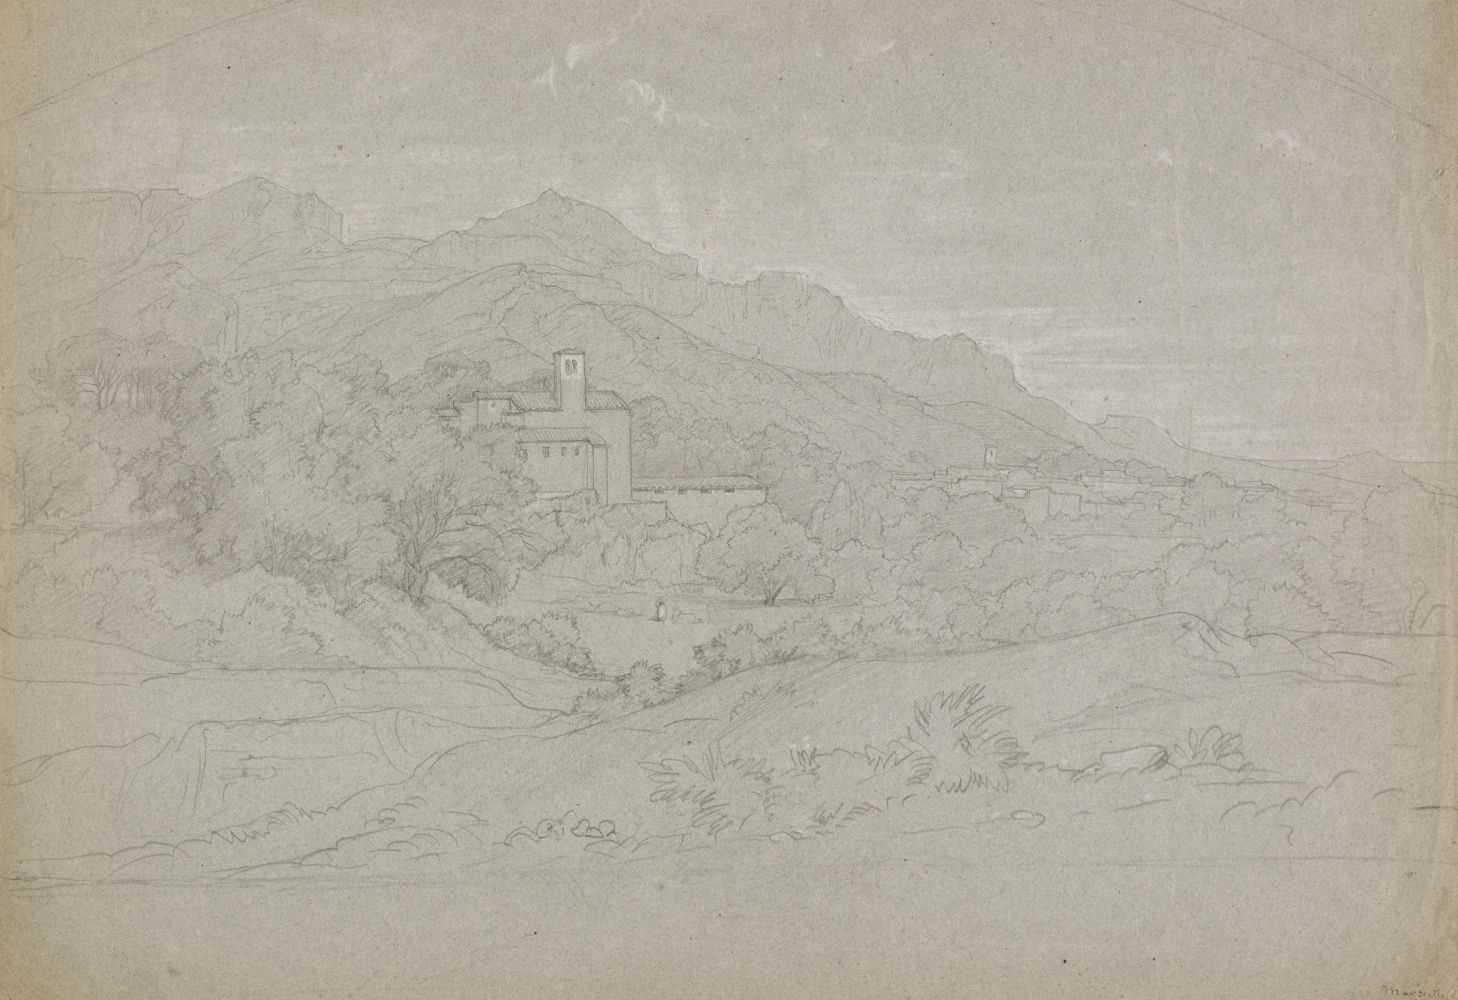 Lot 471 - Bertin (Francois-Edouard, 1797-1871). View on the outskirts of Marseille